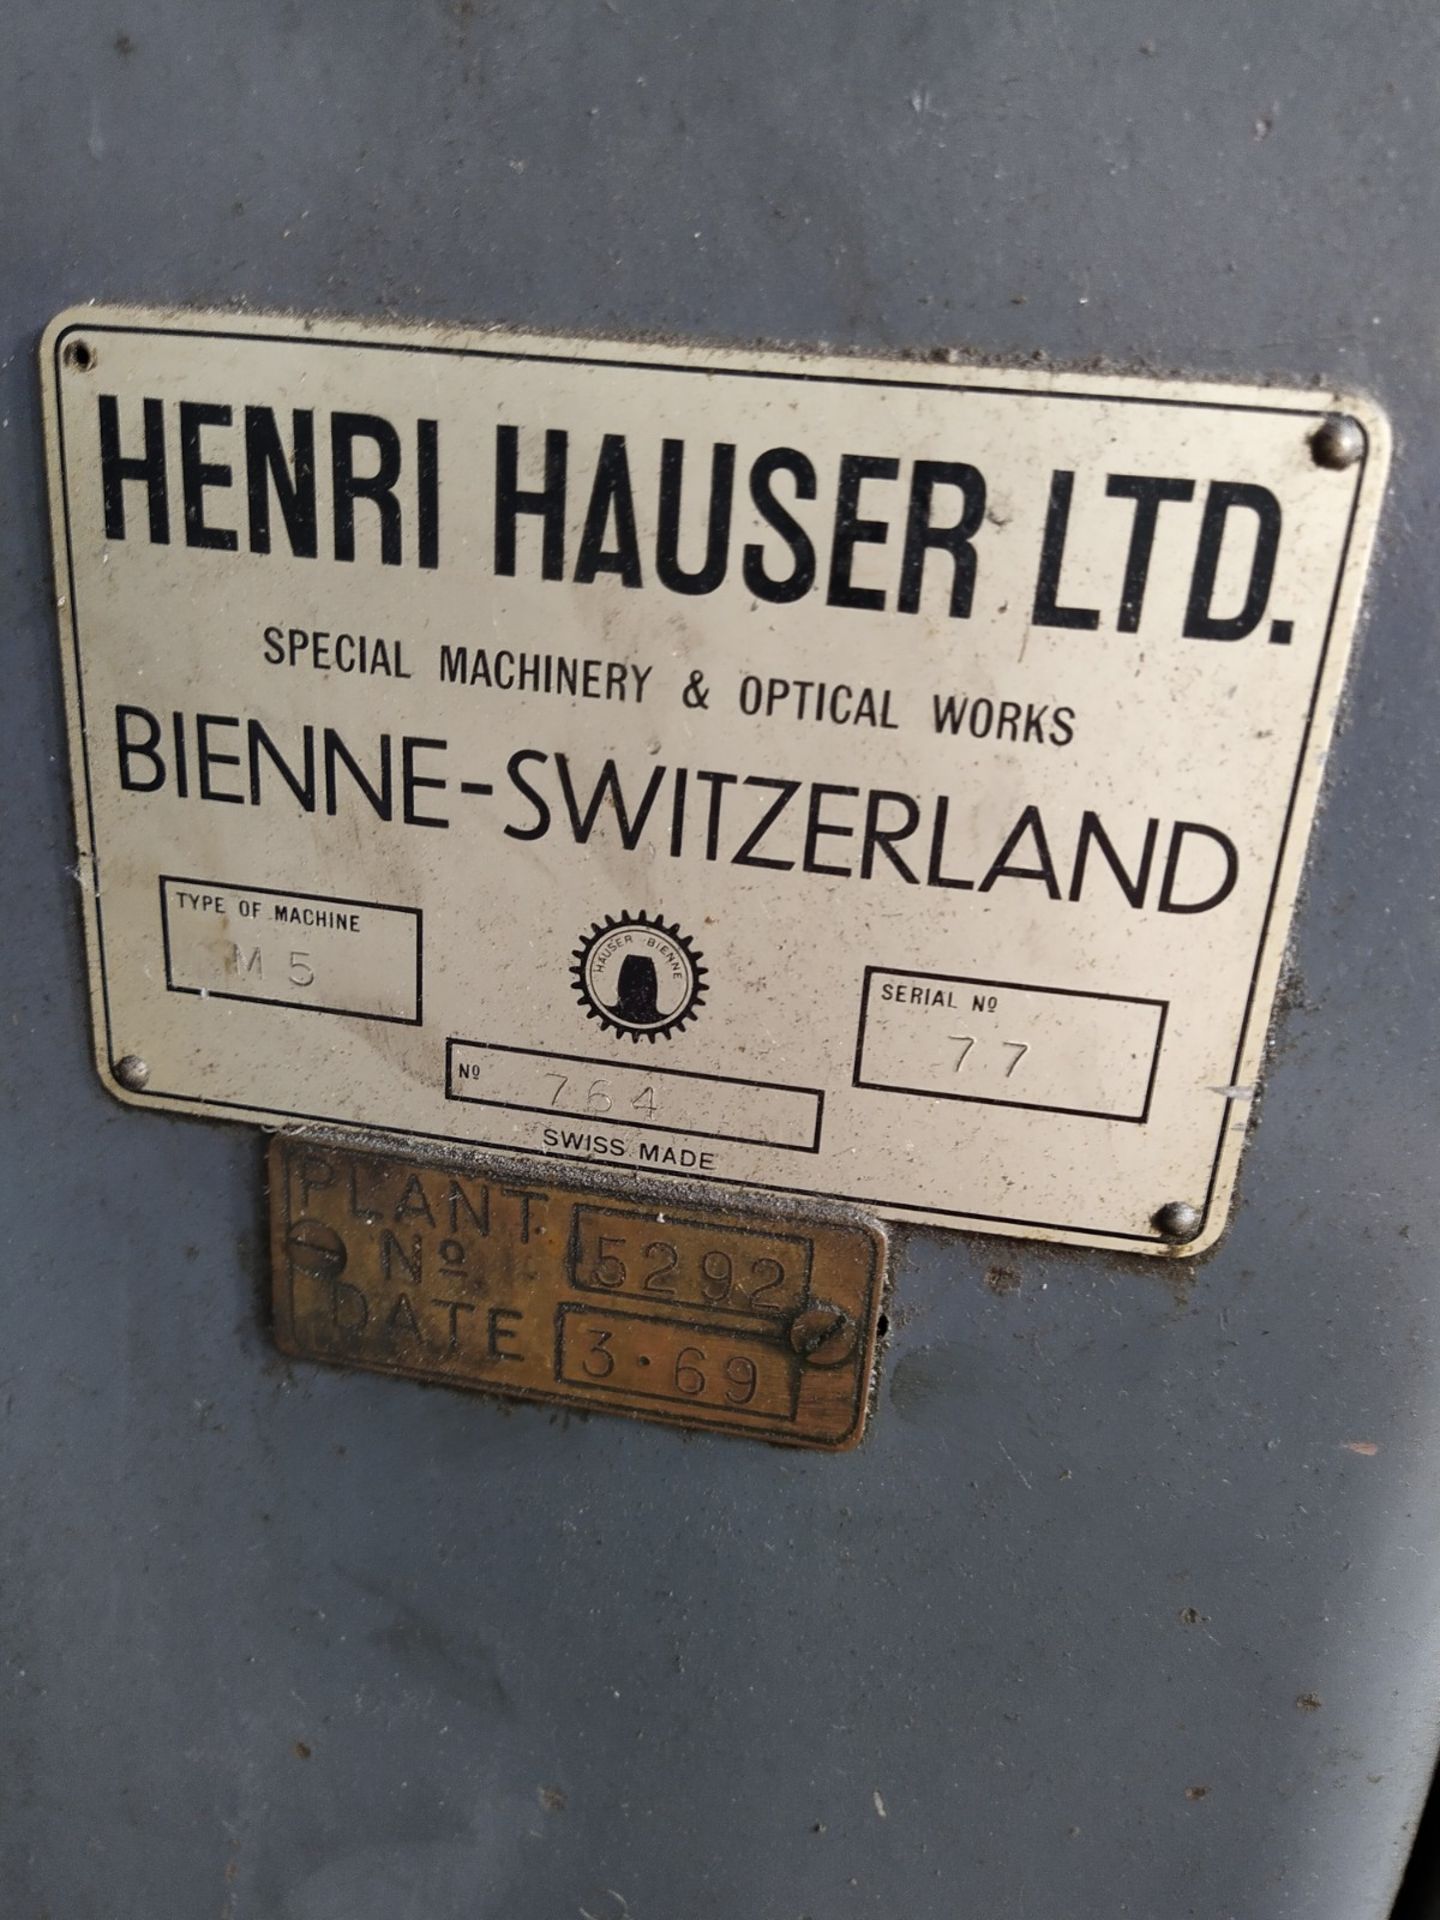 Henri Hauser Jig Boring Machine, table size c/w Mitutoyo DRO, serial no. 77, year of manufacture - Image 10 of 10